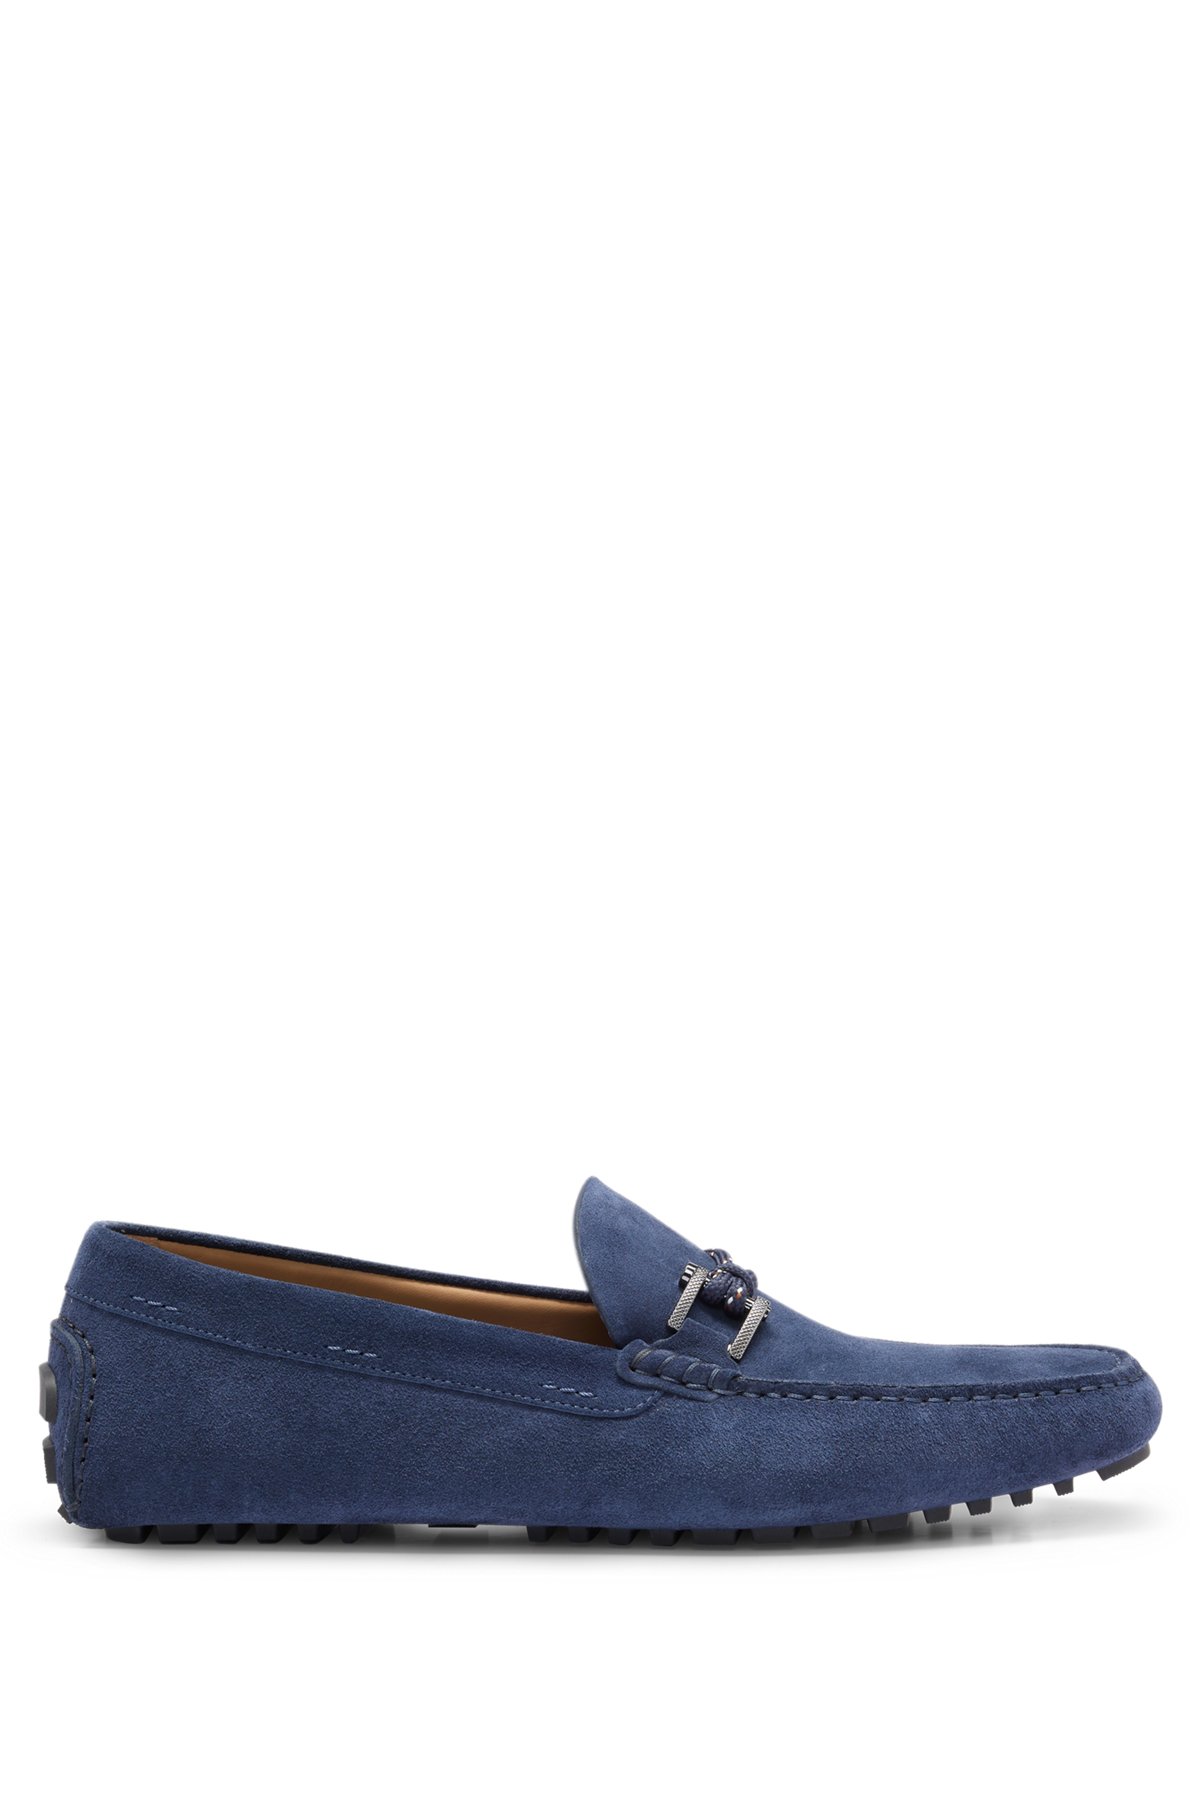 Driver moccasins in suede with cord and hardware details, Blue